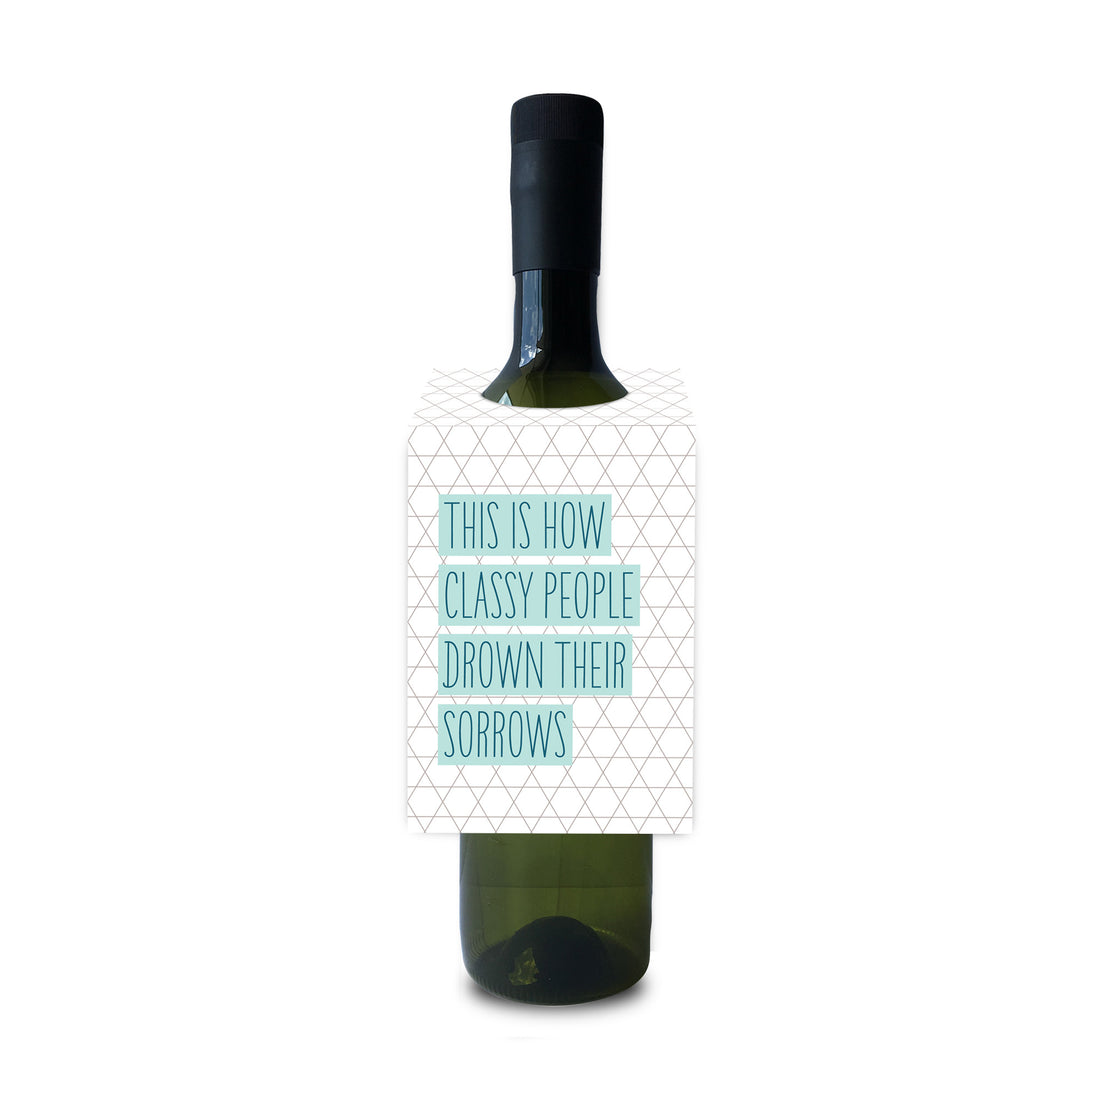 This is how classy people drown their sorrows wine and spirit tag by I&